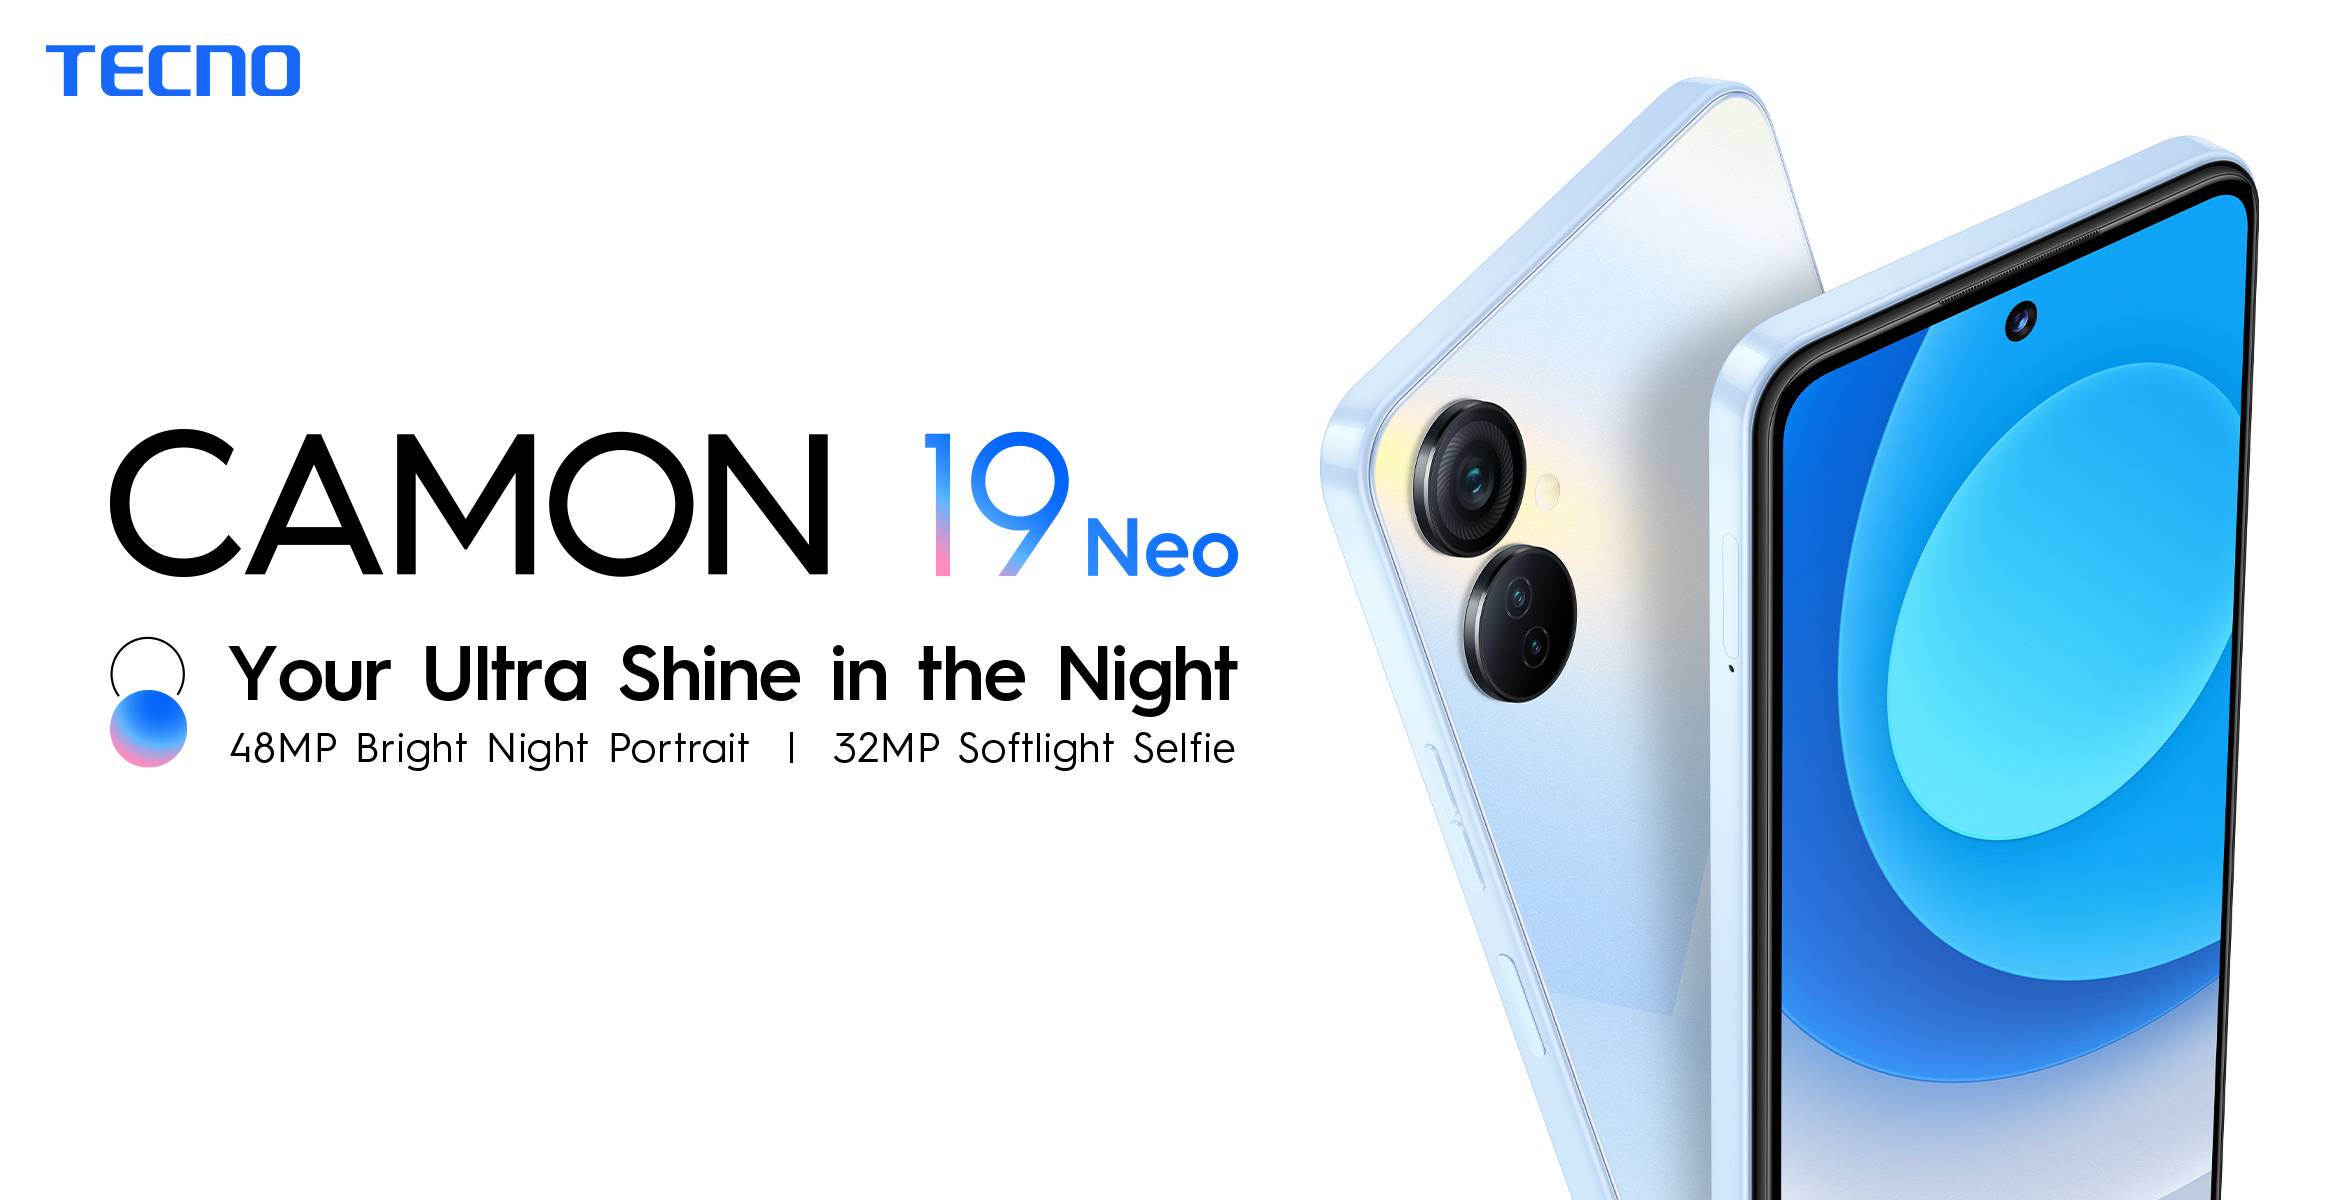 The Exquisite Camon 19 Neo is here to woo users who are ‘Young at Heart.’